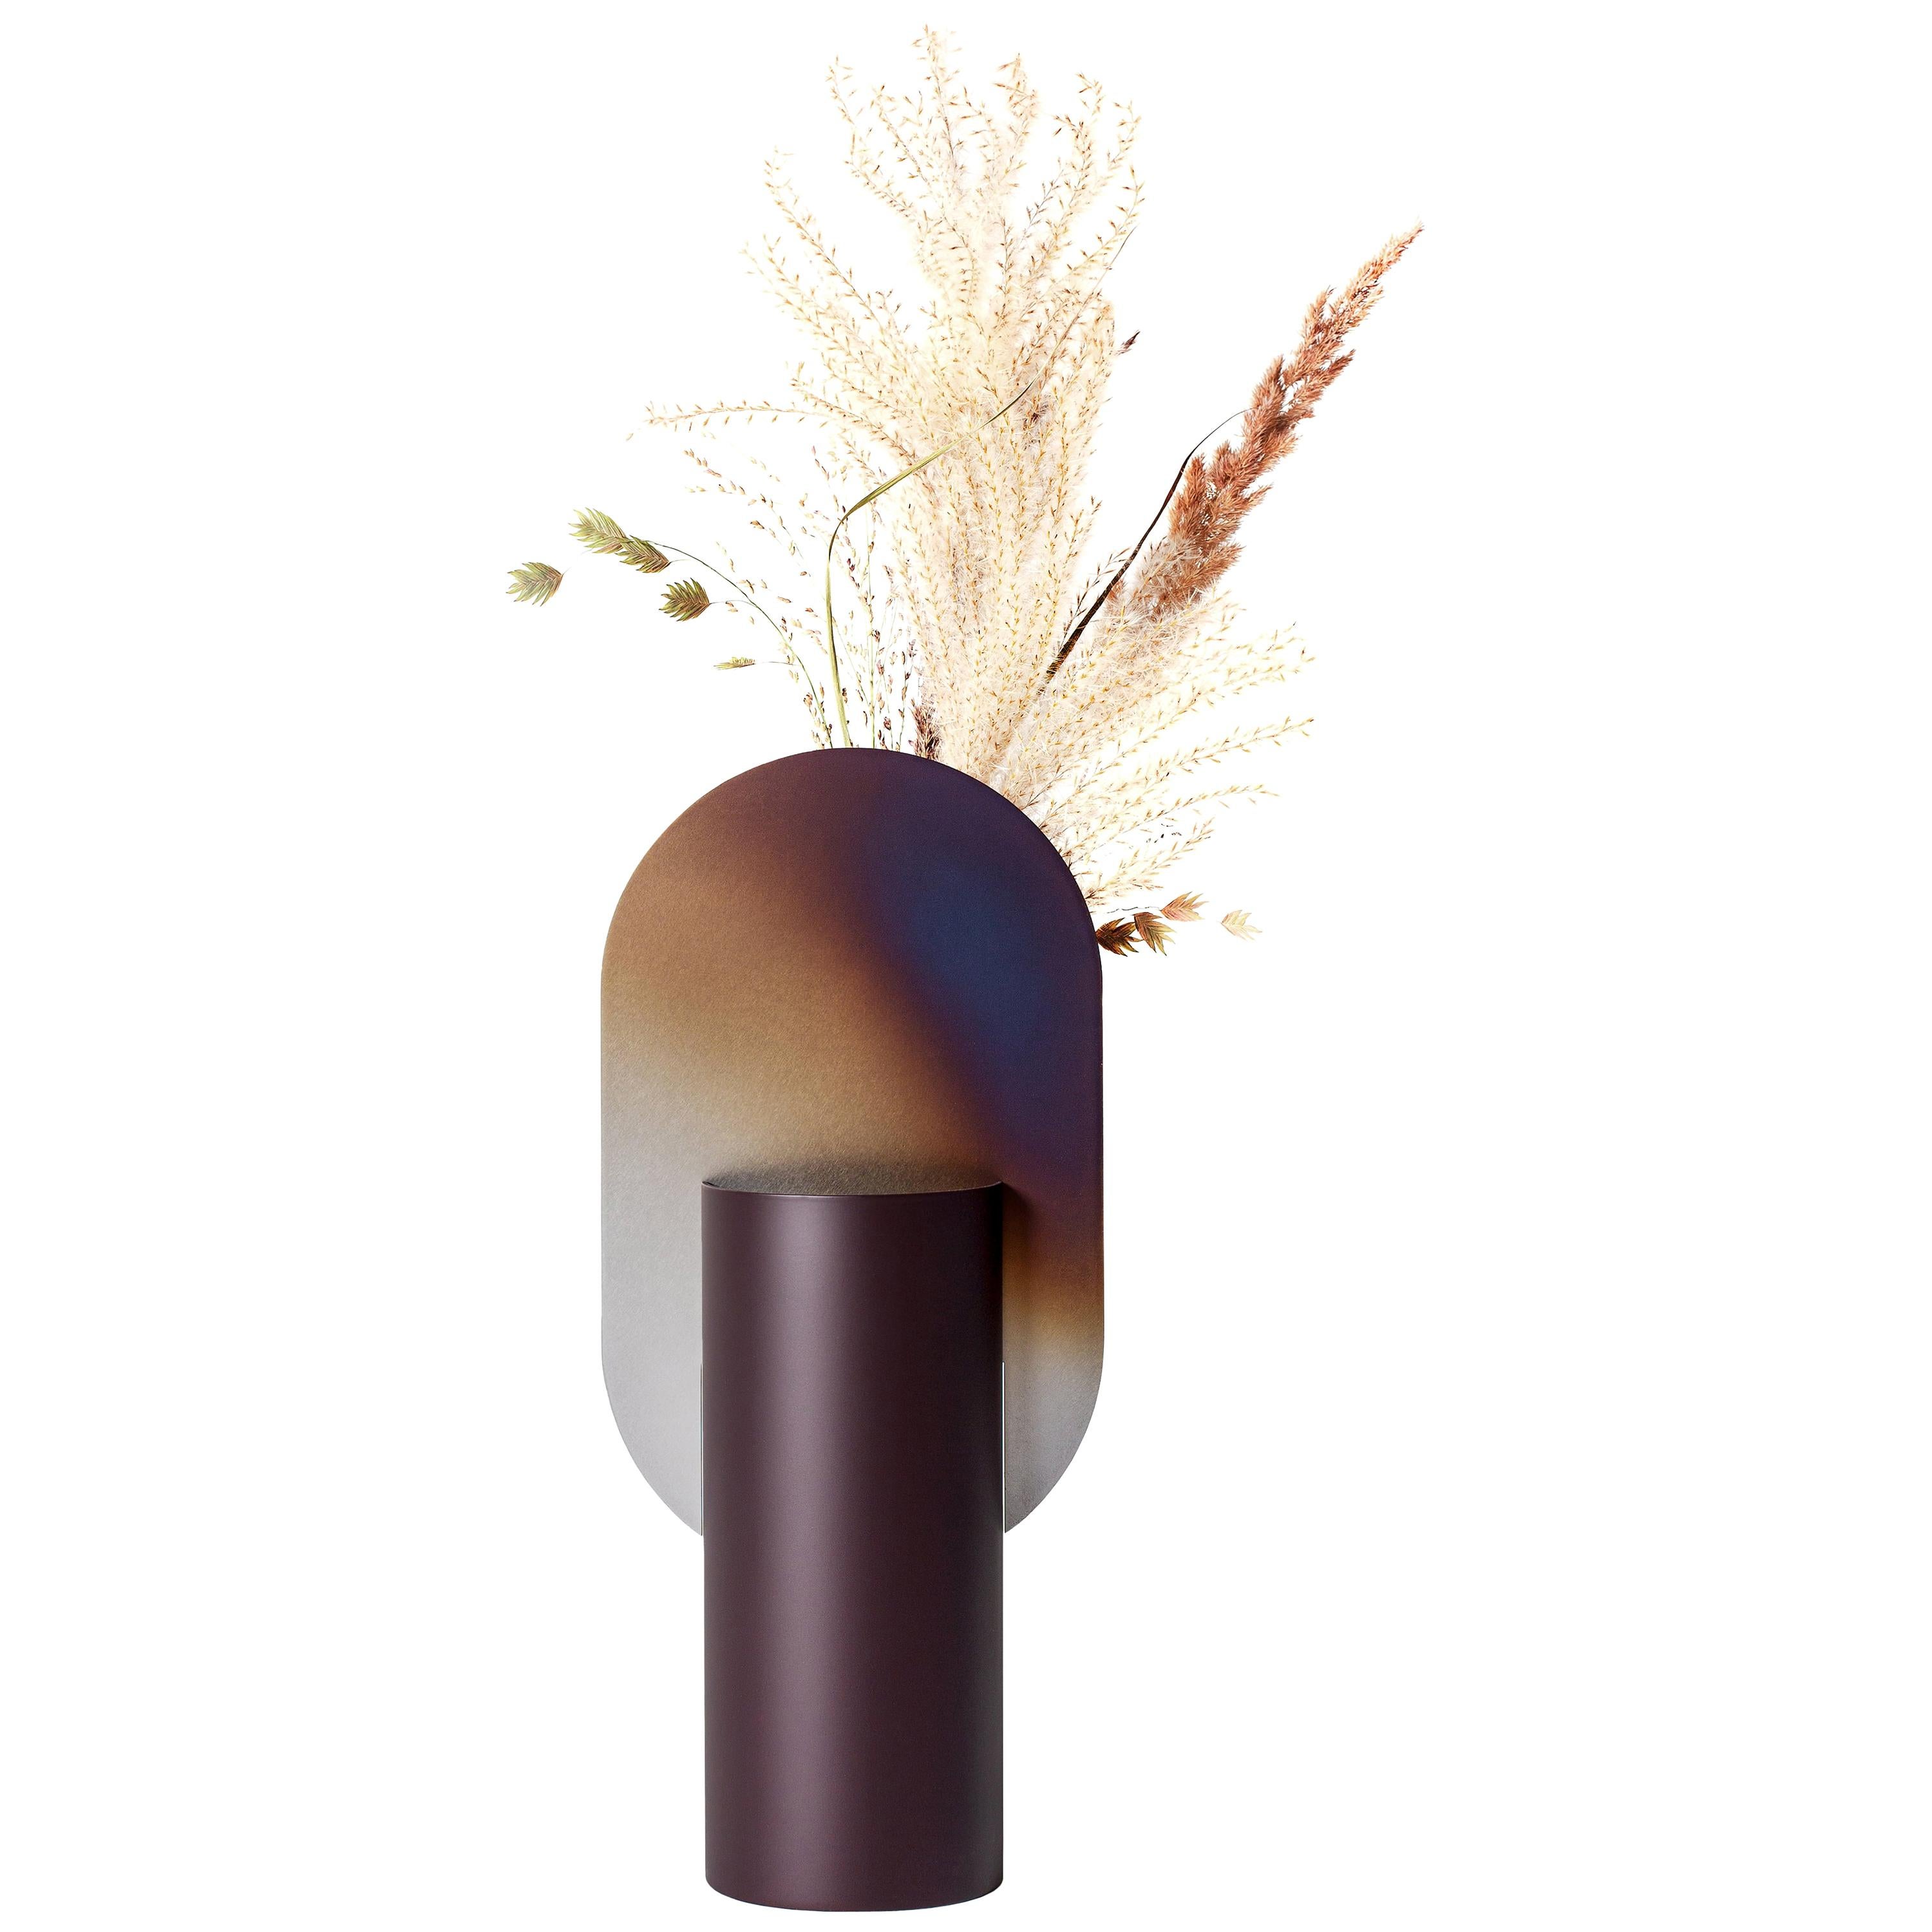 Limited Edition Modern Vase Genke CSL5 by Noom with Burned Steel Accent